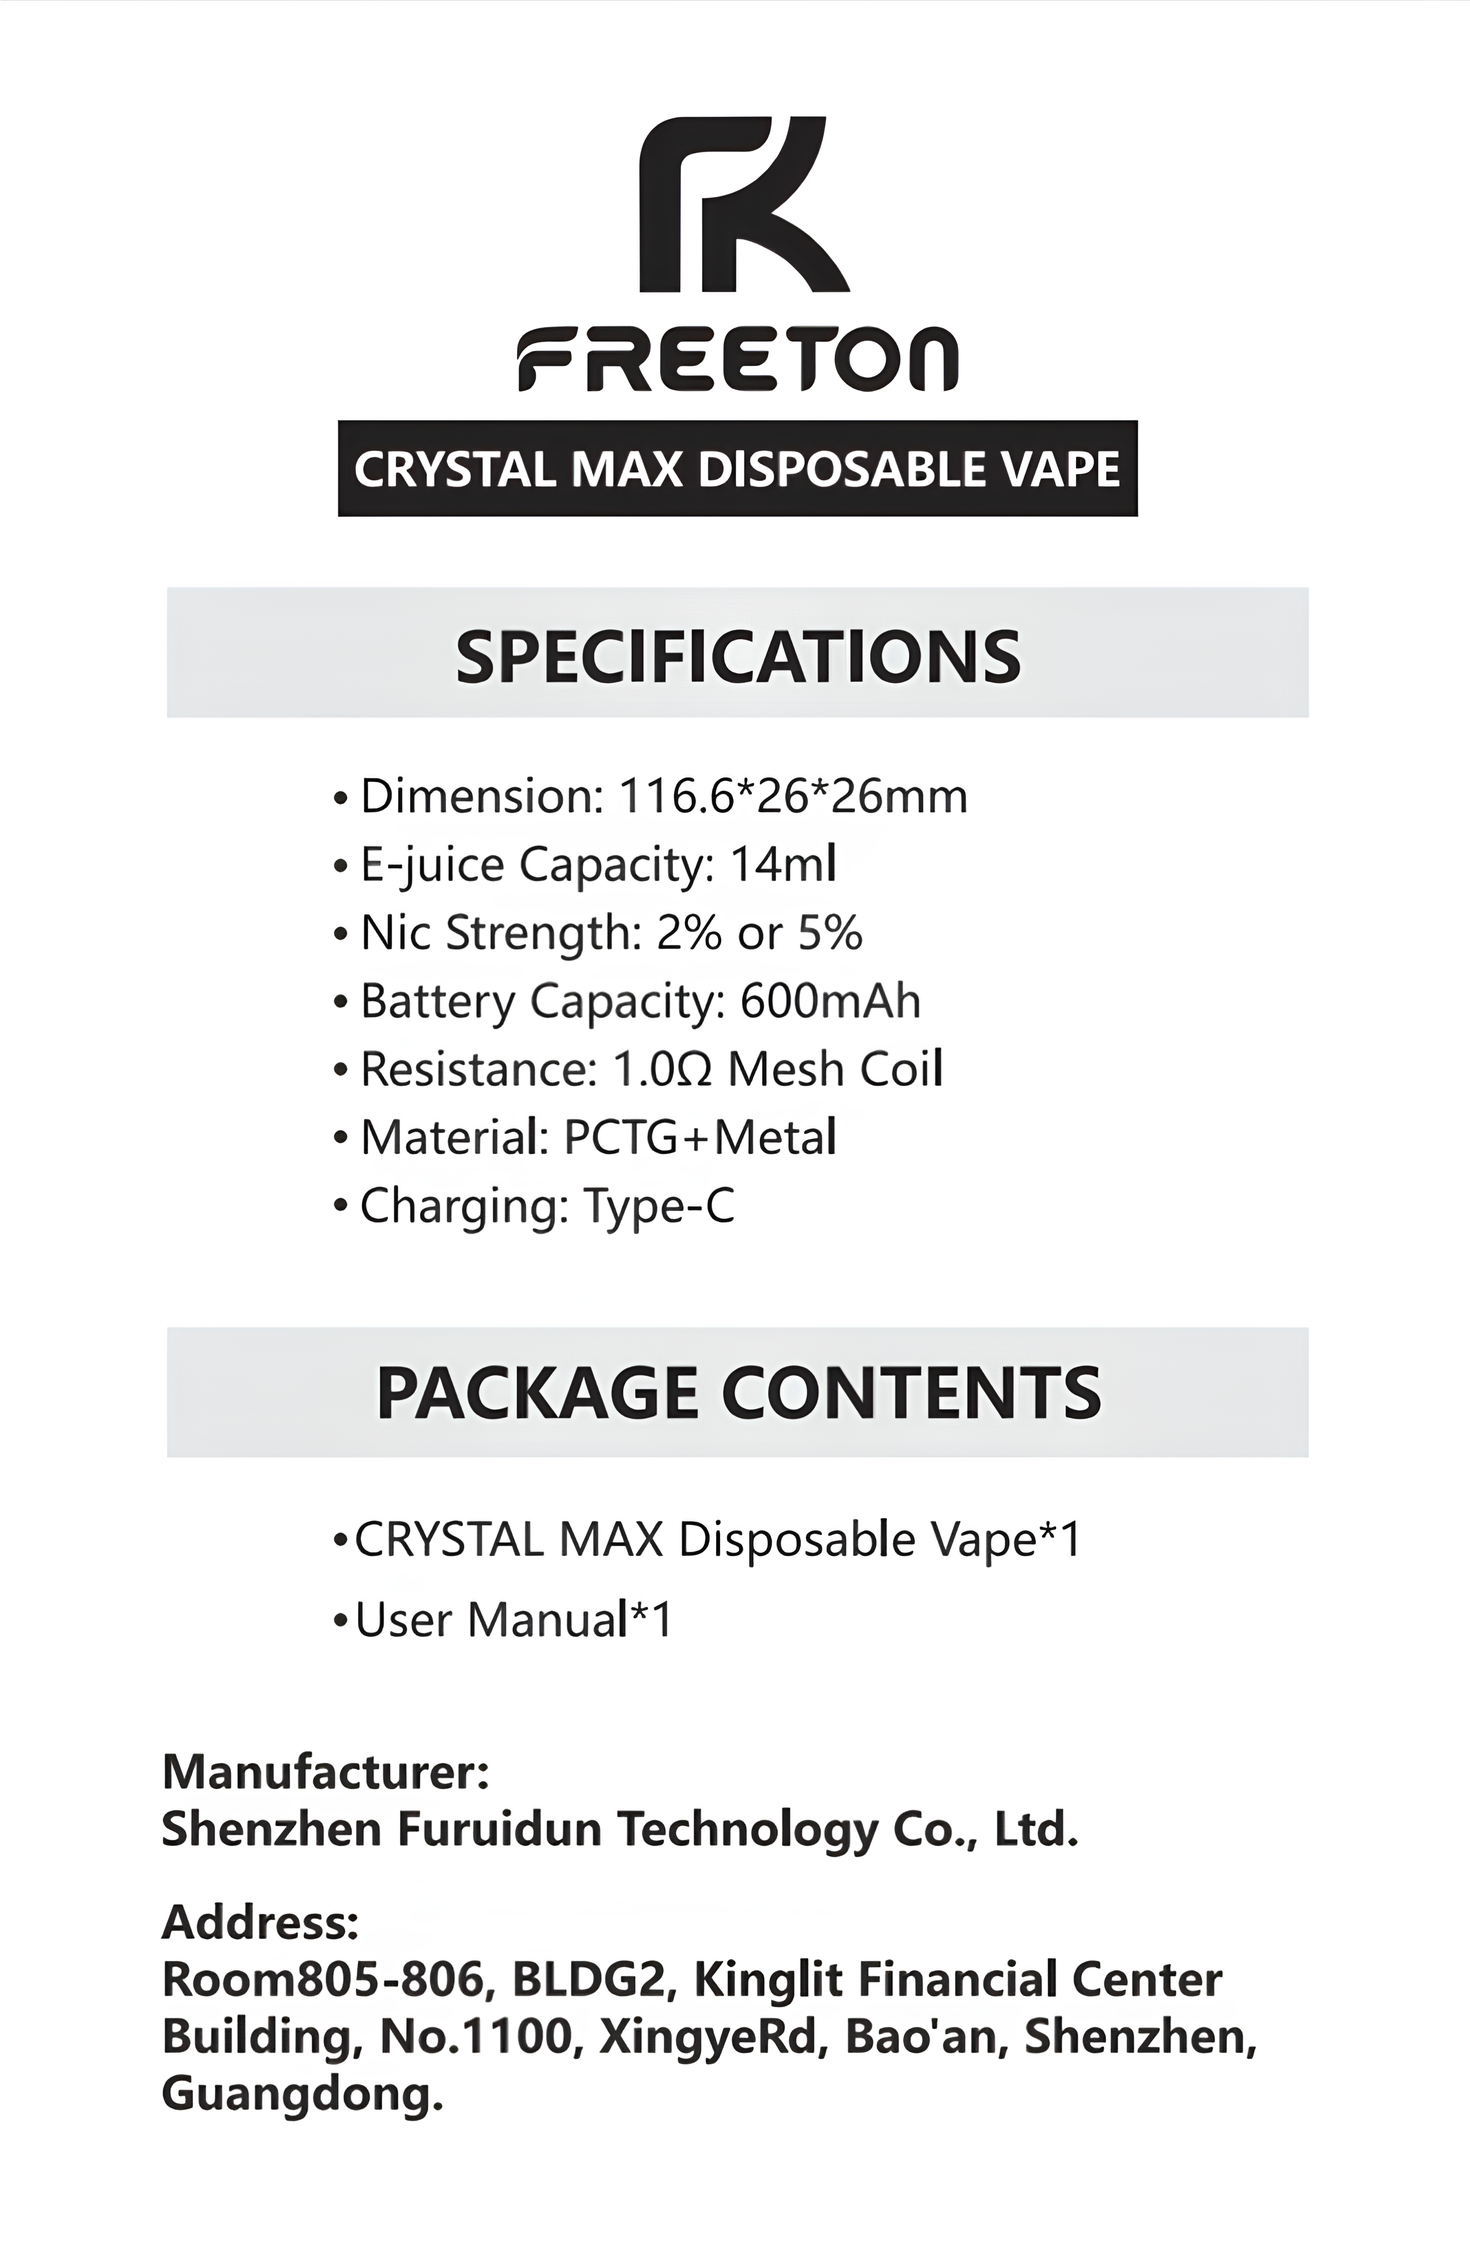 CRYSTAL MAX INSTRUCTIONS FRONT